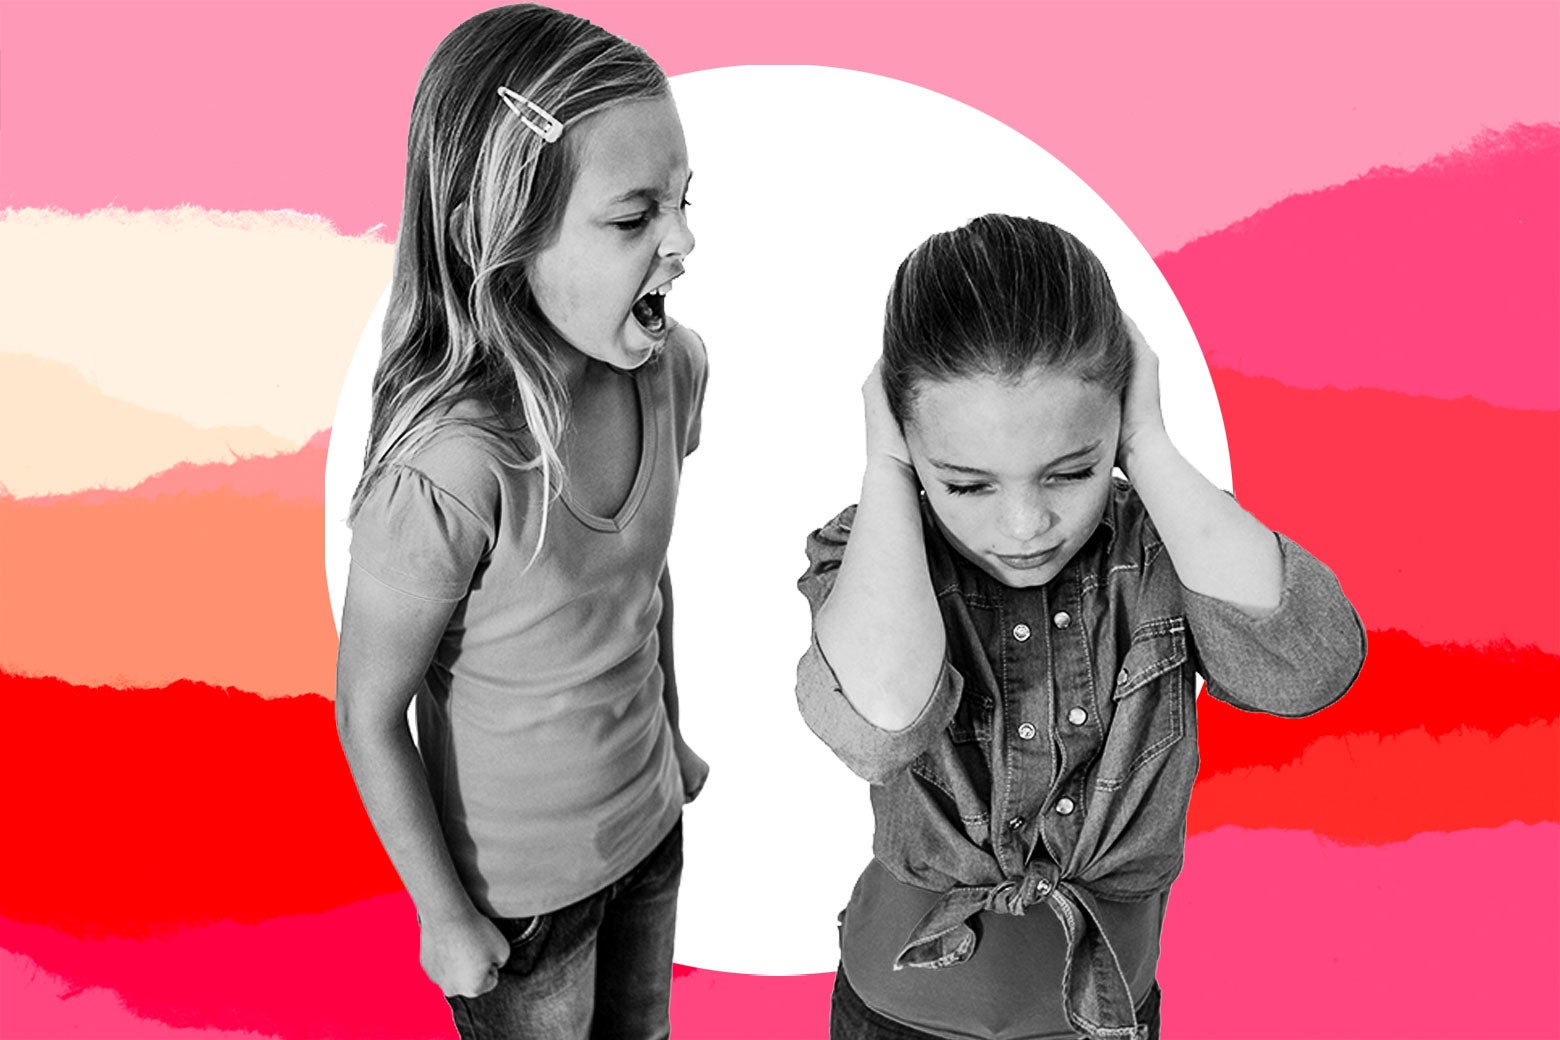 A young girl yells at another girl who holds her hands over her ears.